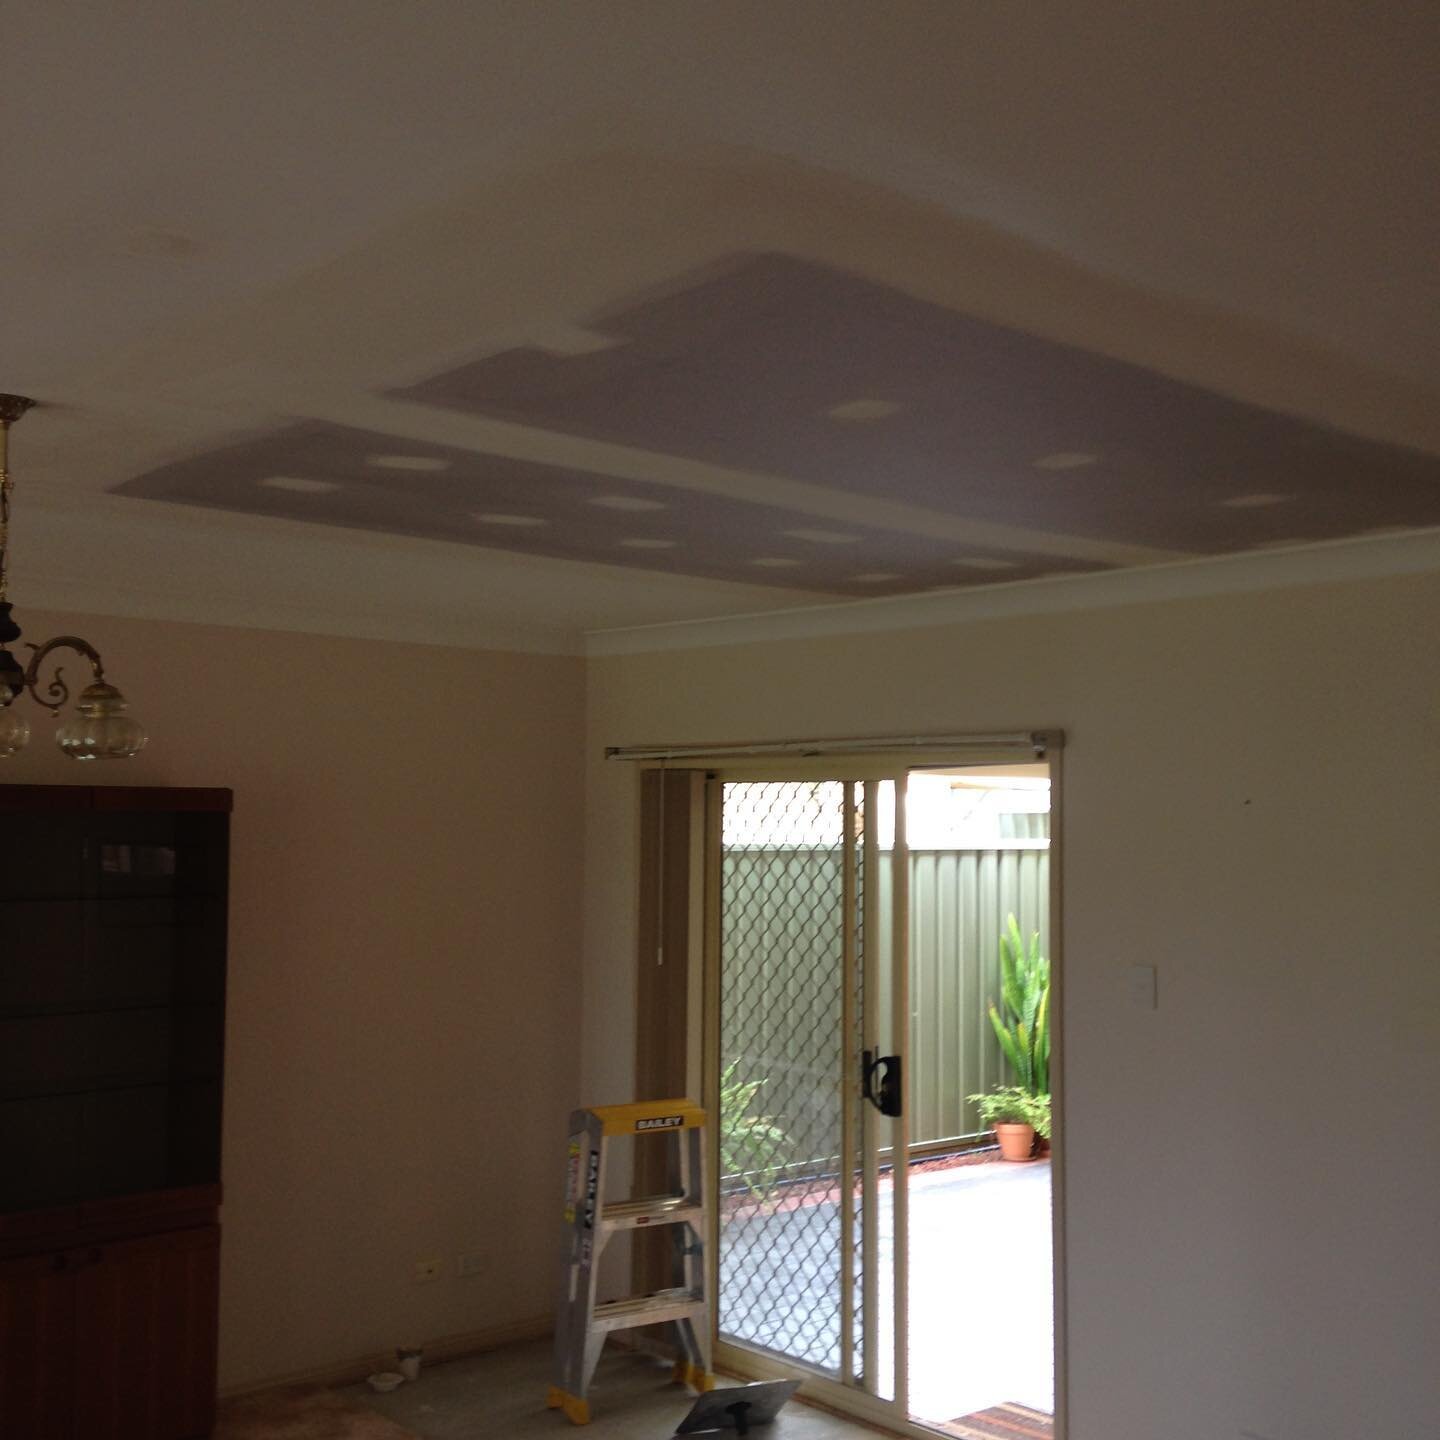 Water damaged ceiling repair at Killarney Vale.

If you&rsquo;re on the NSW Central Coast and have had water damage from recent storms give us a call for a free assessment. 
#plasterer
#ceilingrepair
#centralcoast
#stormdamage